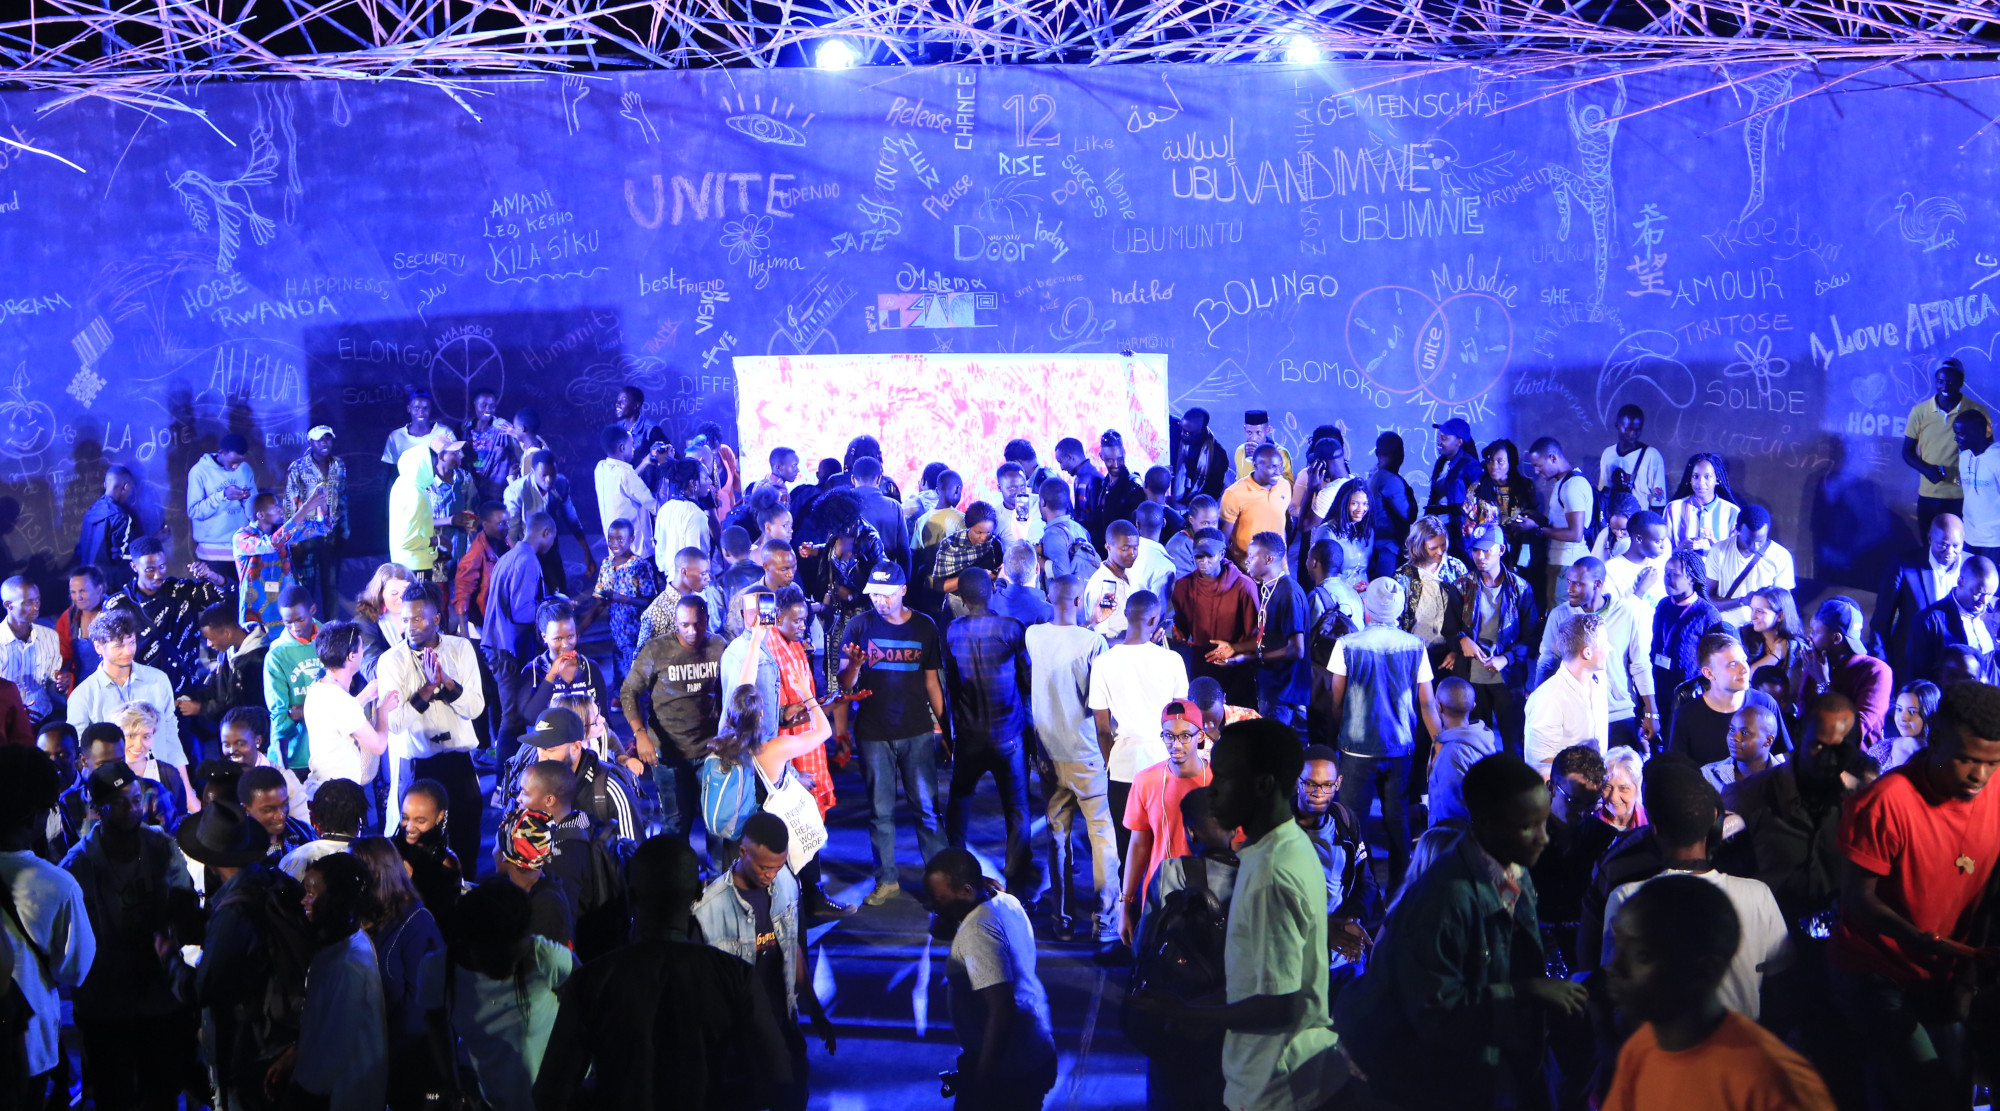 Organisers also invited revellers onto the stage to showcase their artistic skills. / All photos by Craish Bahizi